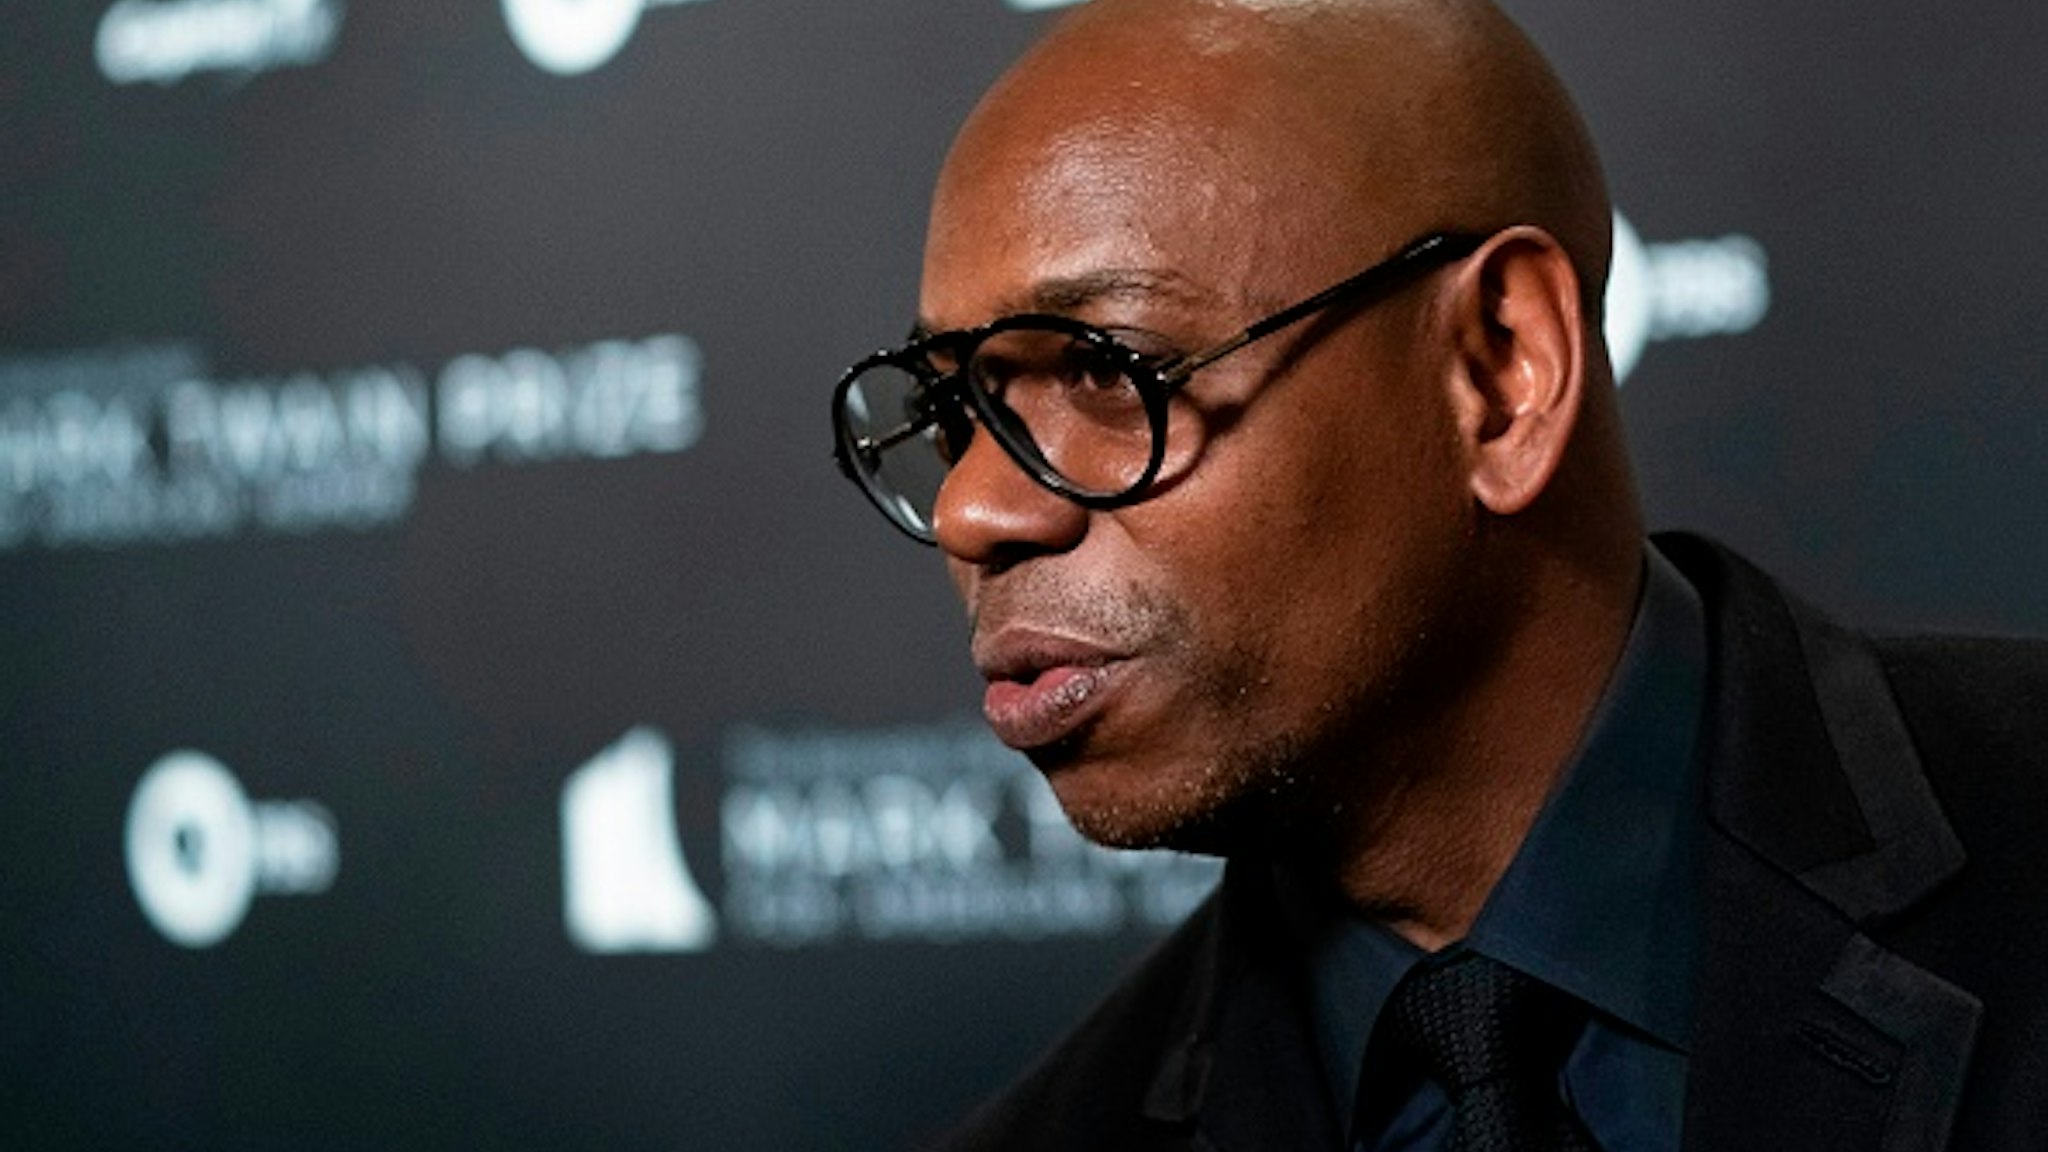 US comedian Dave Chappelle and recipient of the Mark Twain Award for American Humor arrives at the Kennedy Center for award ceremony on October 27, 2019 in Washington, D.C.